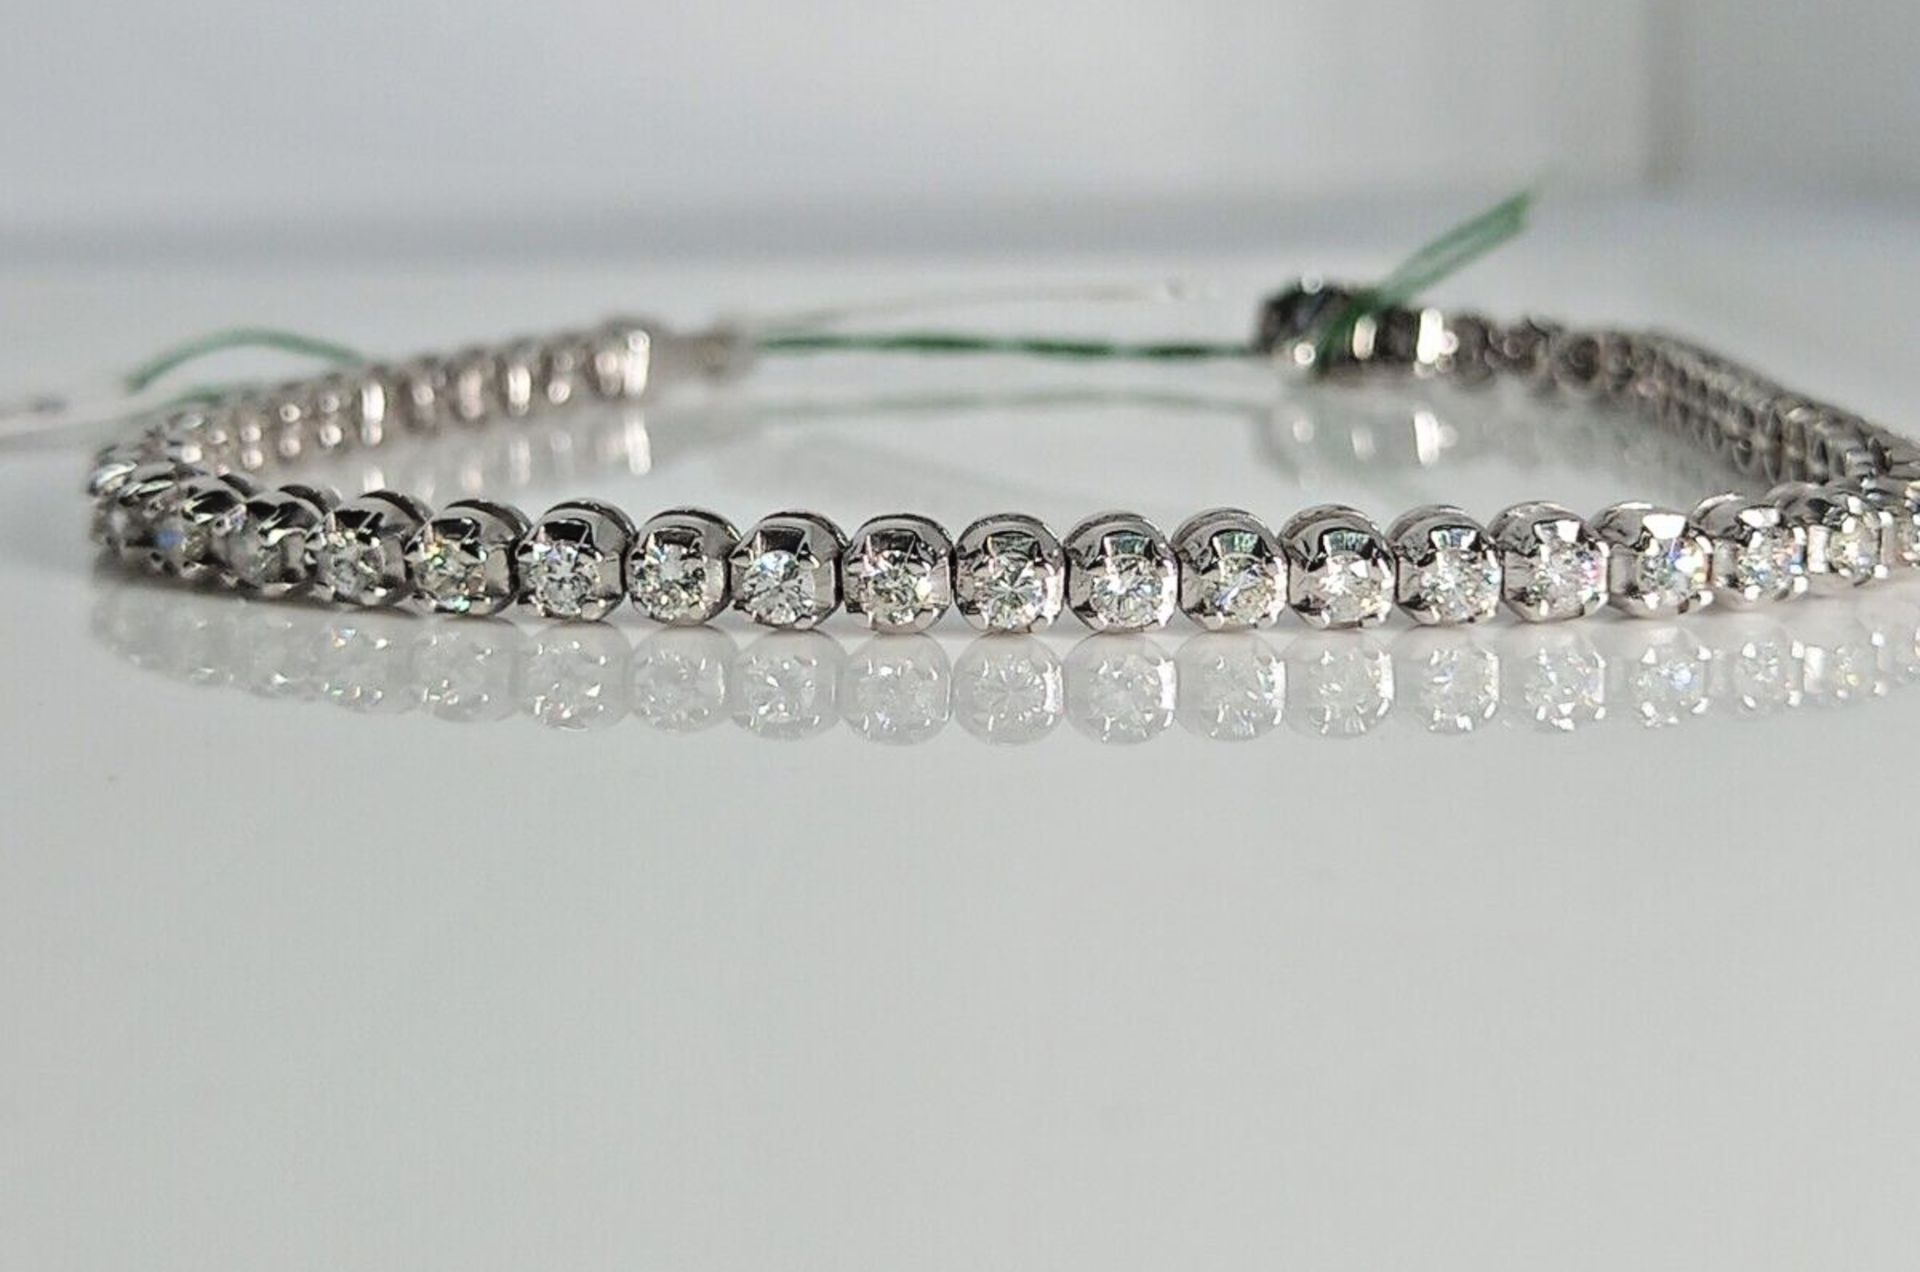 2.39CT DIAMOND TENNIS BRACELET 18CT WHITE GOLD IN GIFT BOX WITH VALUATION CERTIFICATE OF £7,995